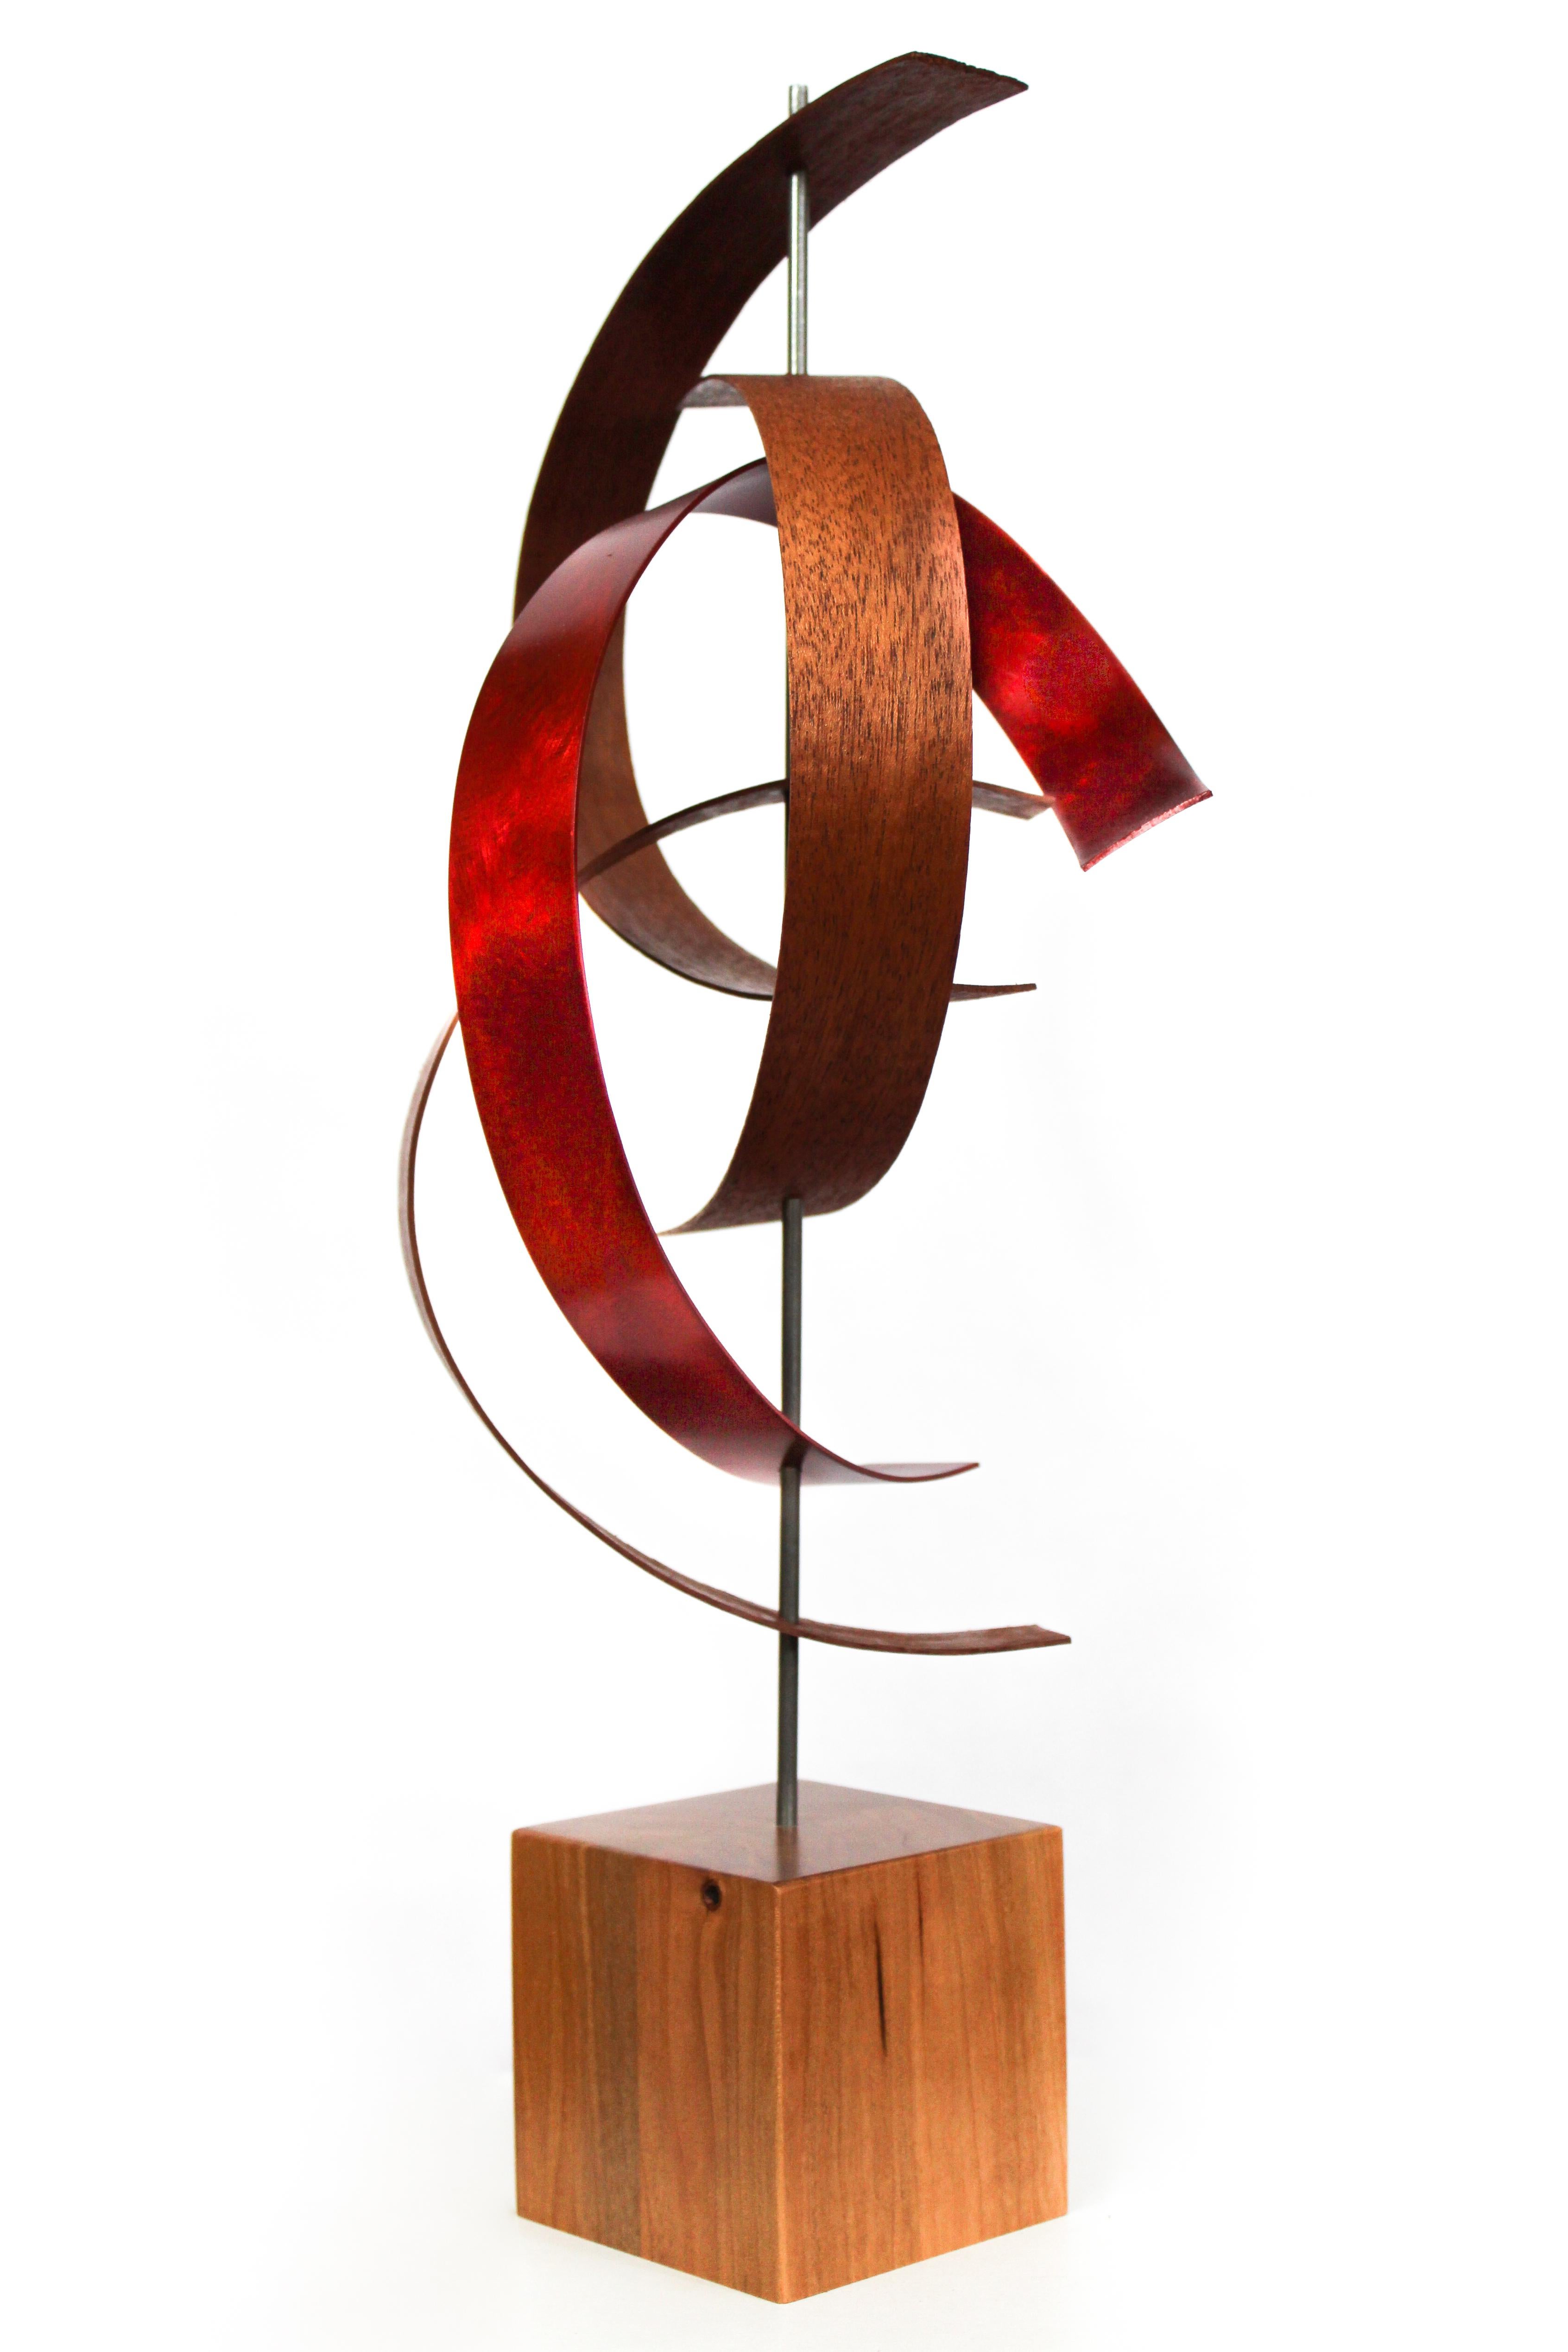 Contemporary Wood Metal Sculpture Art, Mid-Century Modern Inspired, by Jeff L. 1